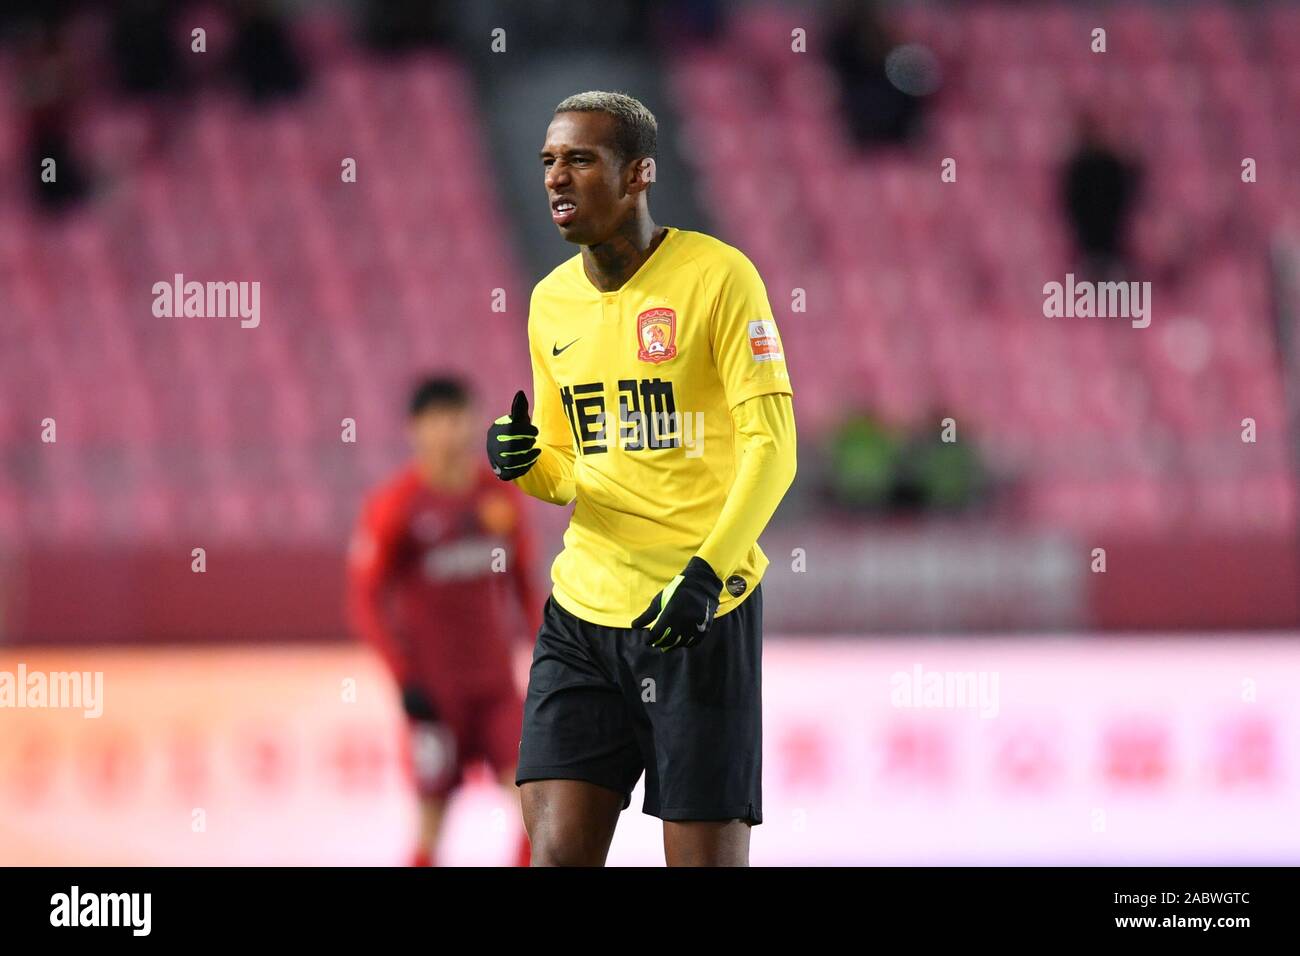 Conceicao, known as Anderson Talisca or simply Talisca, of Guangzhou  Evergrande Taobao F.C. reacts during the 29th round match of Chinese  Football Association Super League (CSL) against Hebei China Fortune in  Langfang